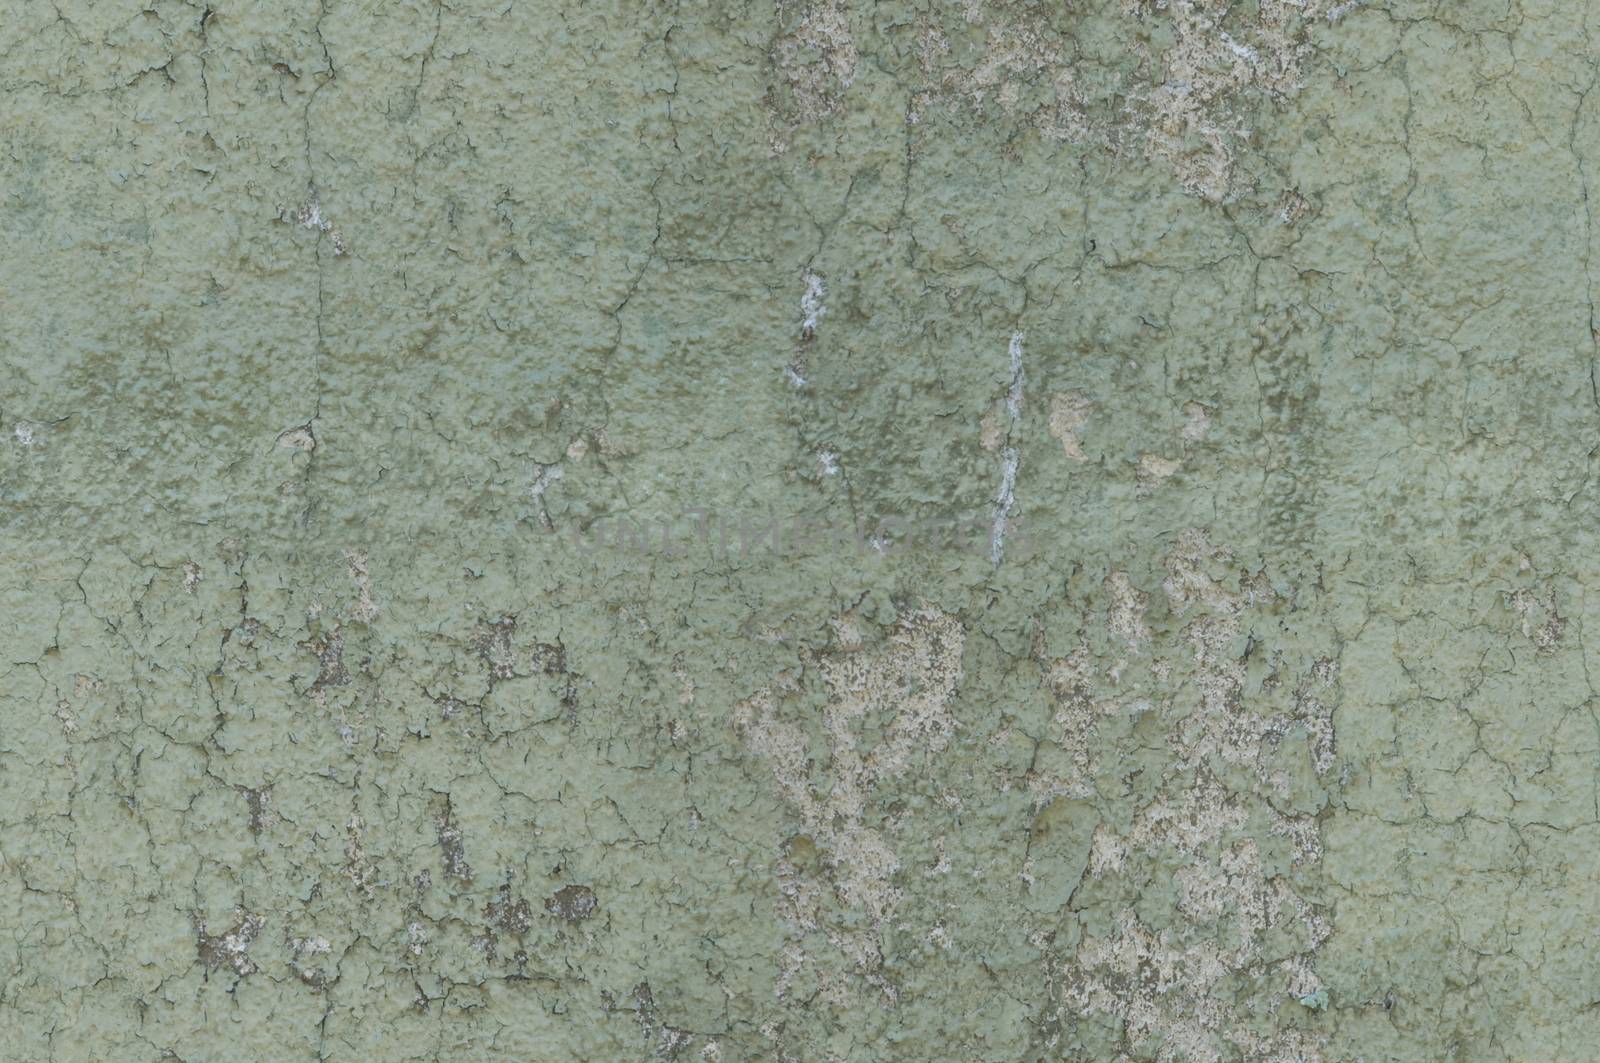 Grayish green weathered and distressed textured wall, seamlessly tileable